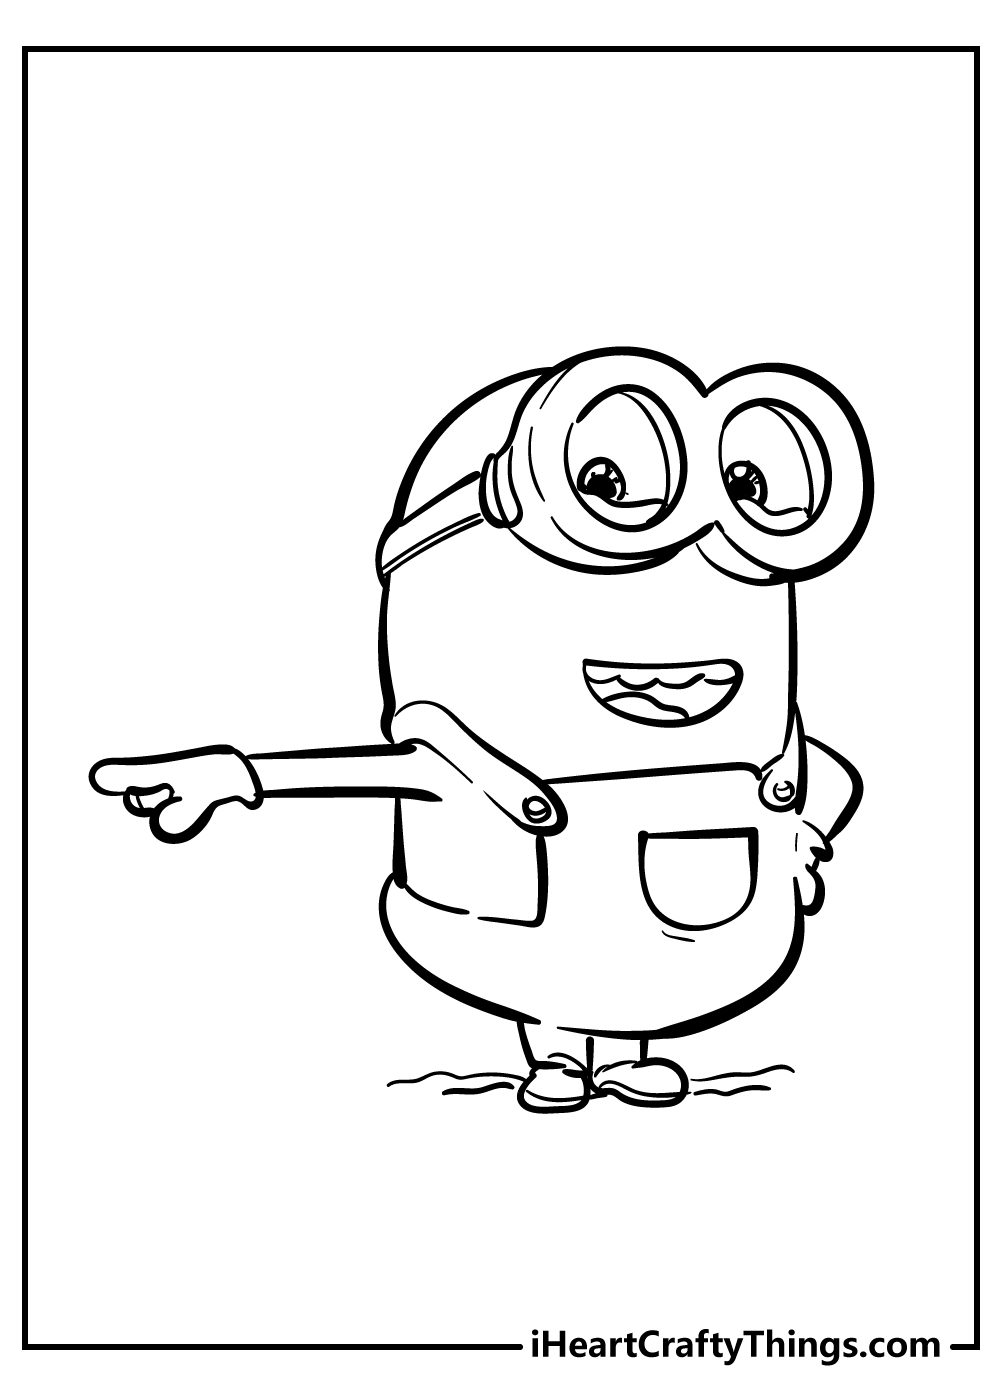 Online Dictionary  easy minion coloring pages   Google Search